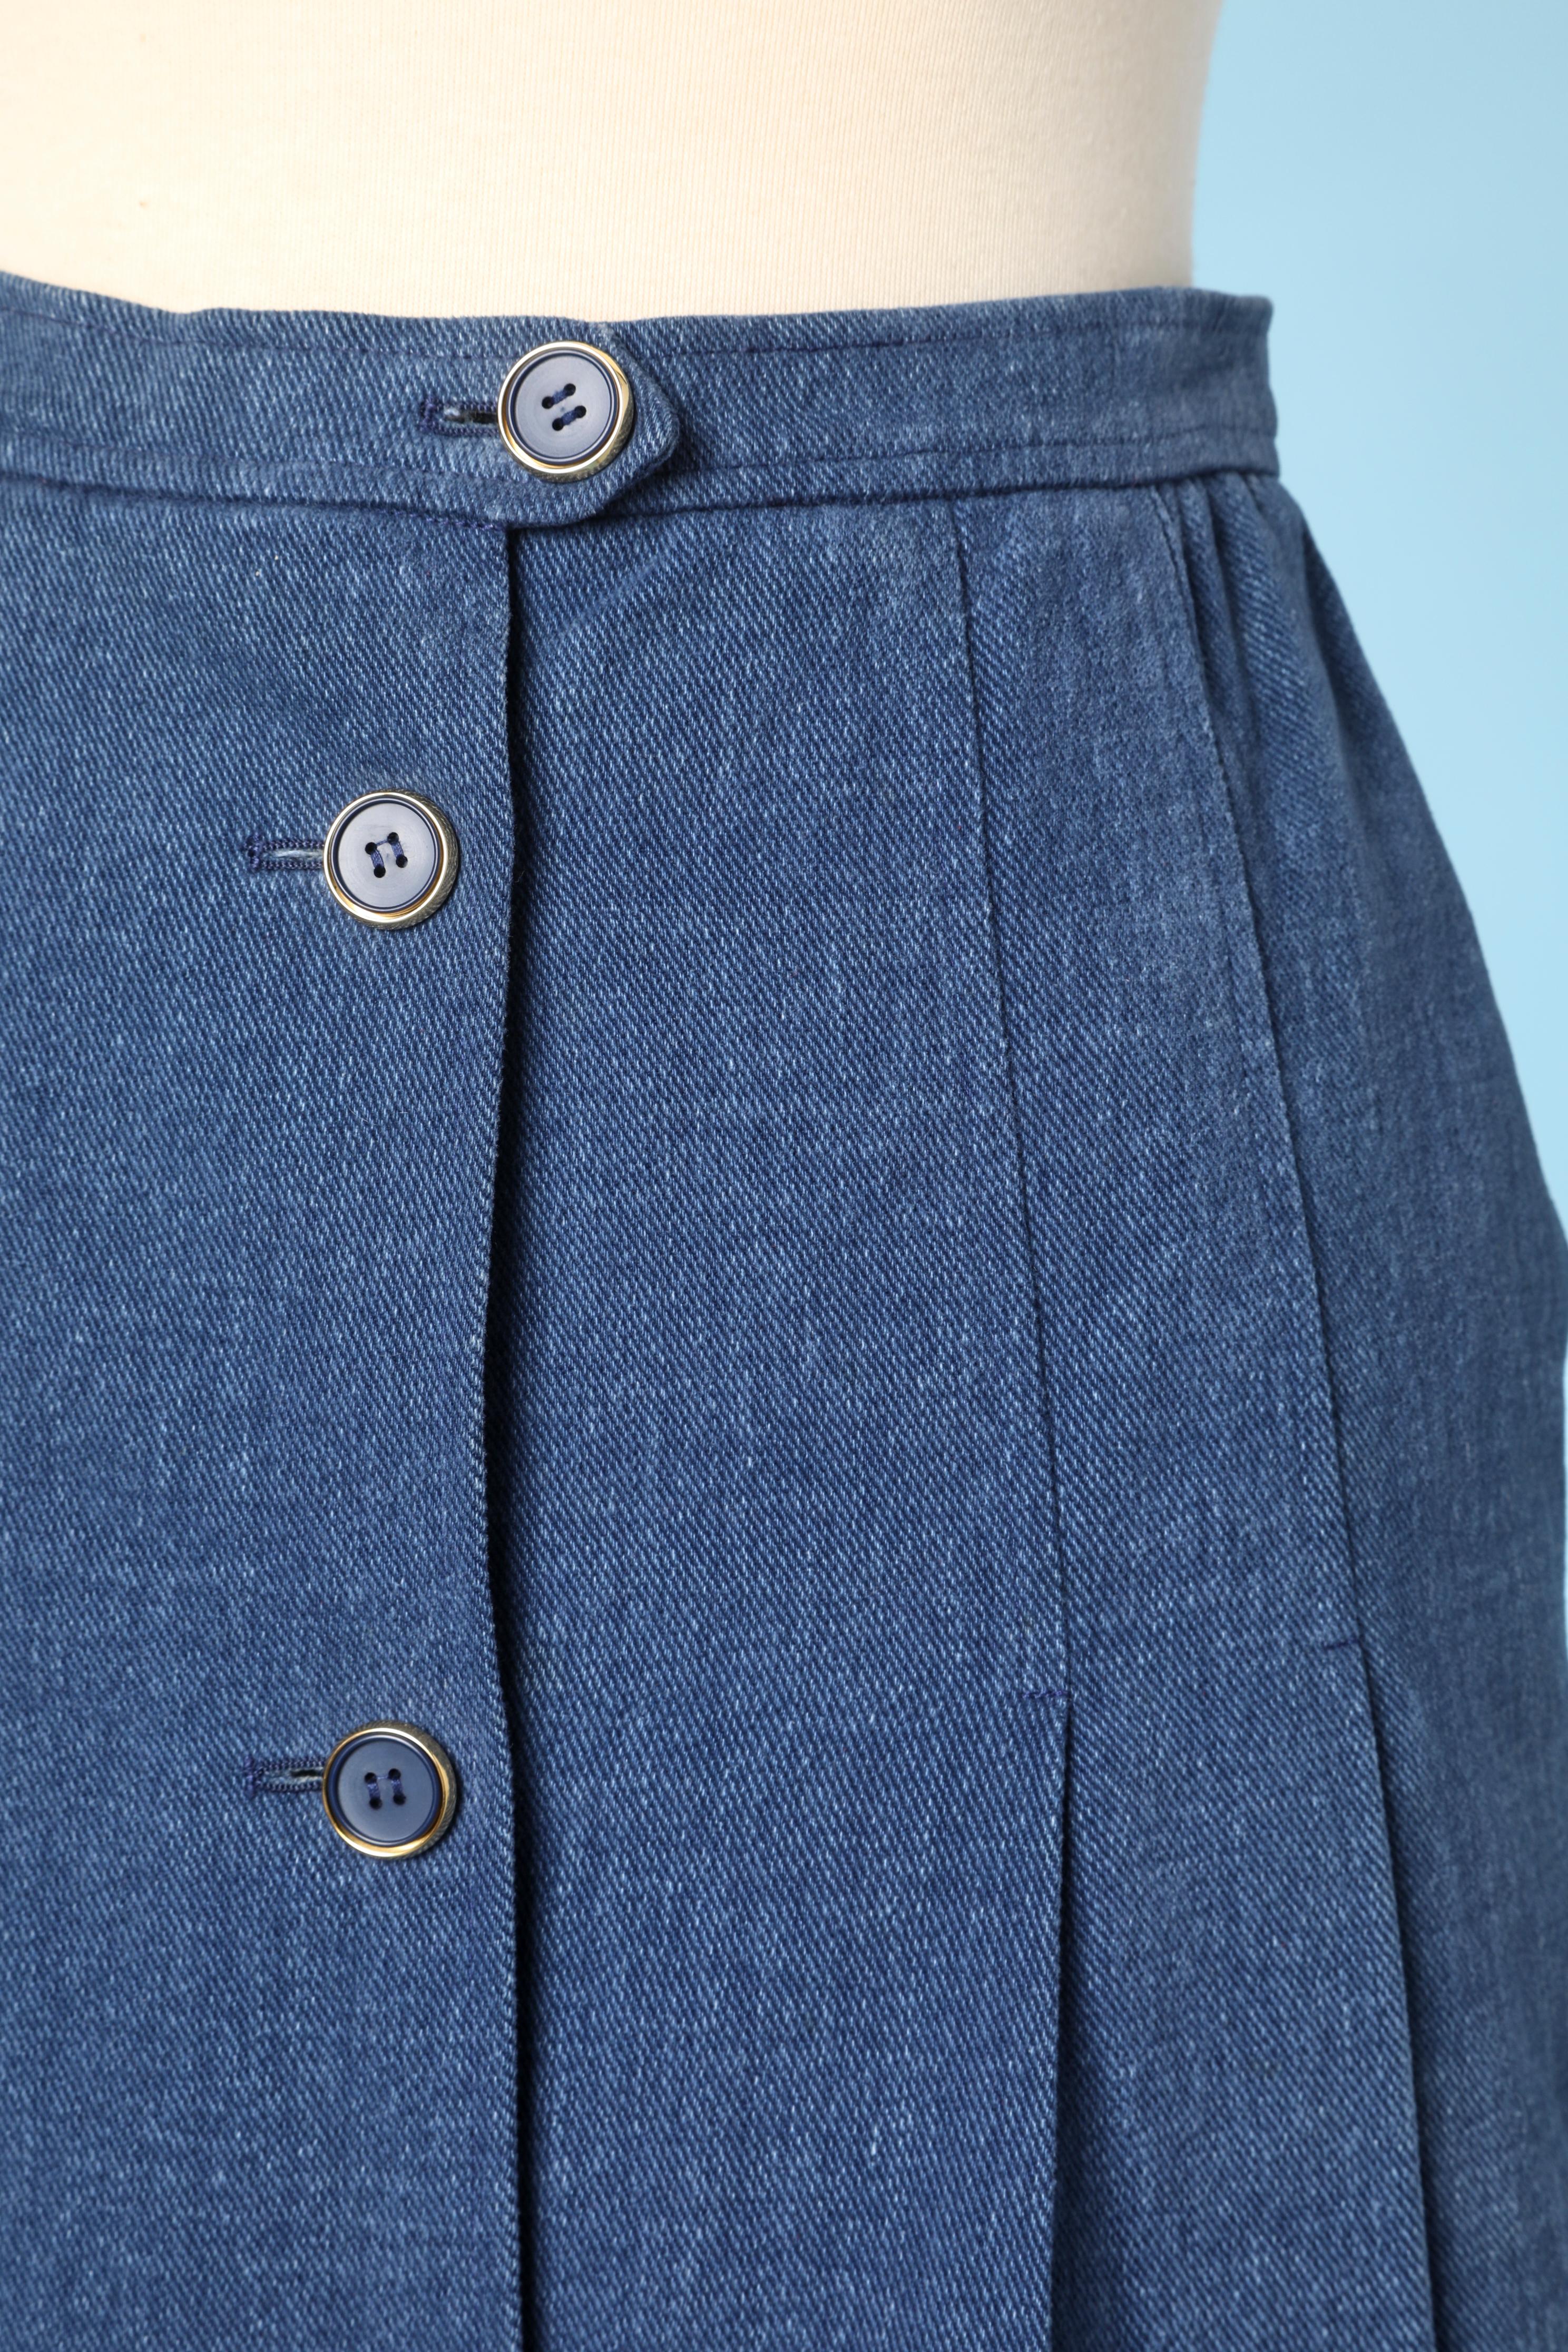 Pleated denim cotton skirt with buttons in the middle front. No lining. 
SIZE 38